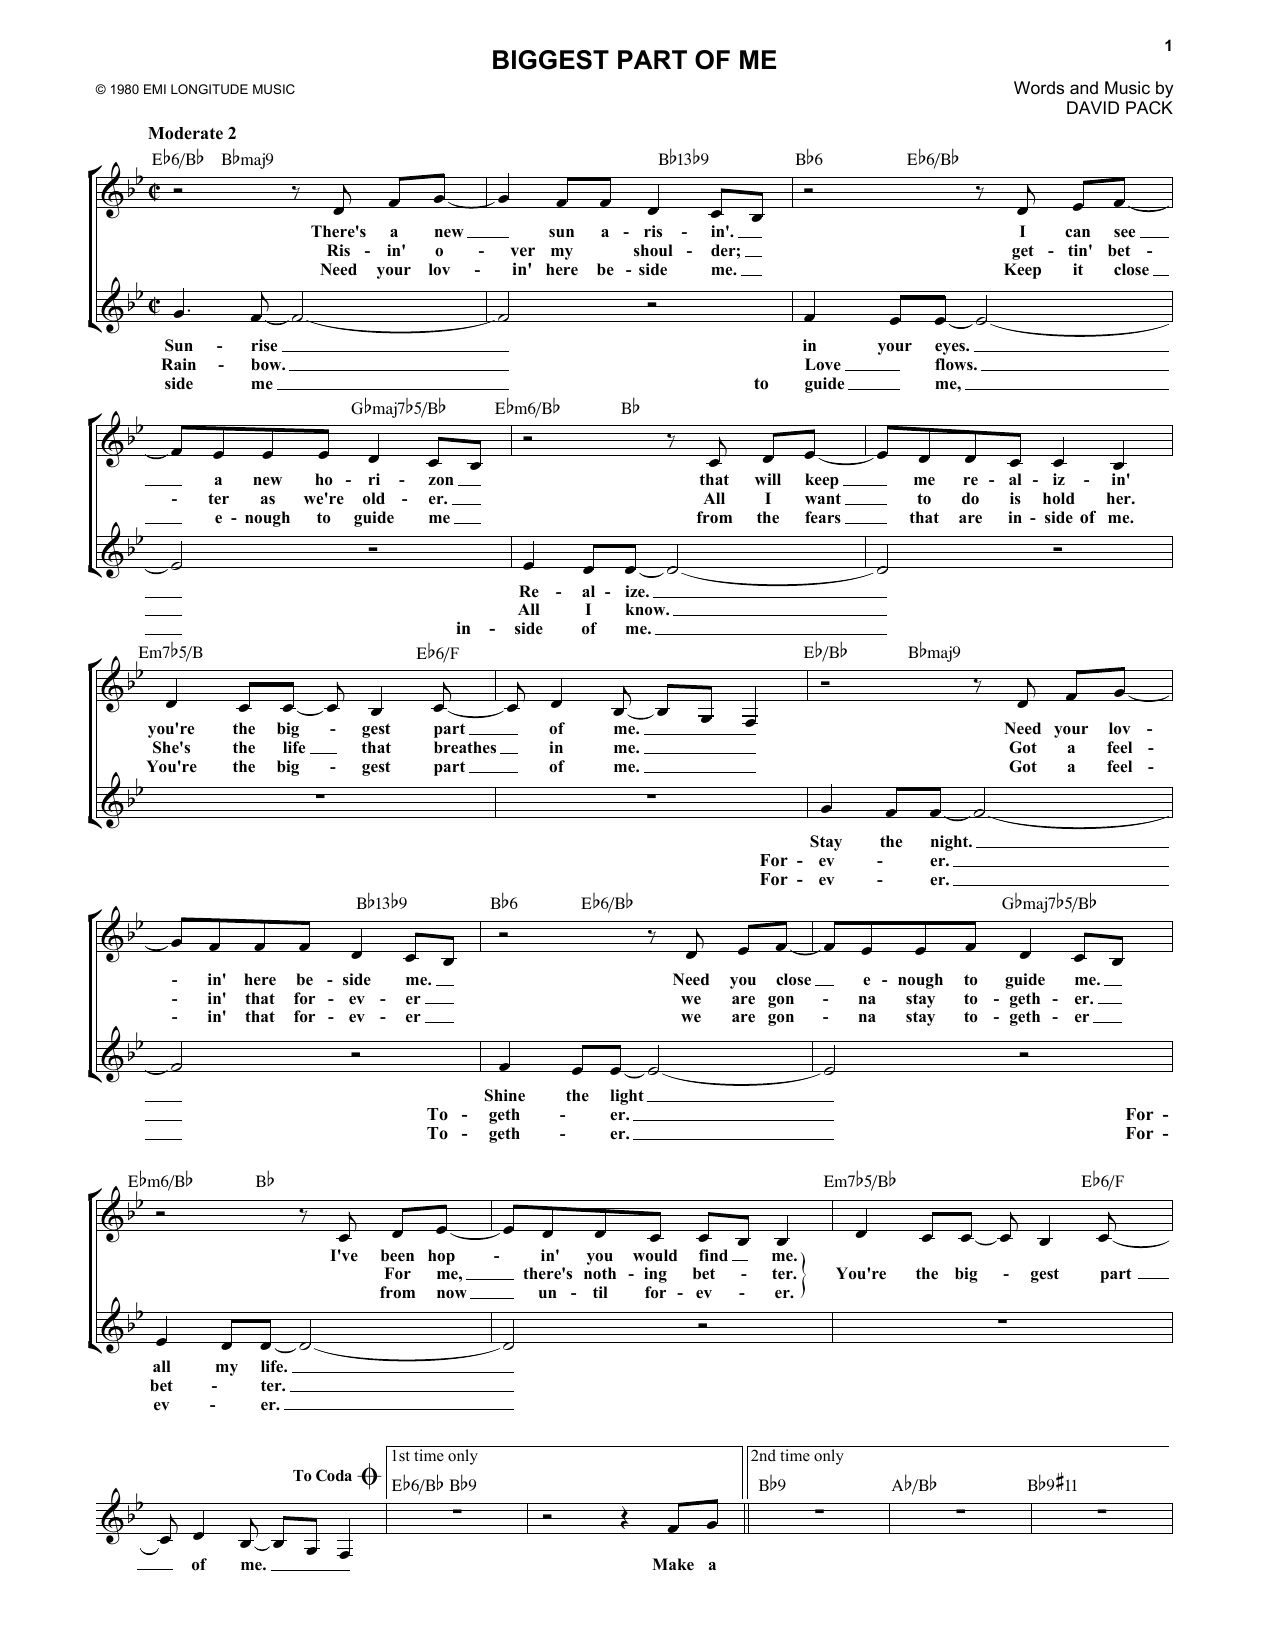 Download Ambrosia Biggest Part Of Me Sheet Music